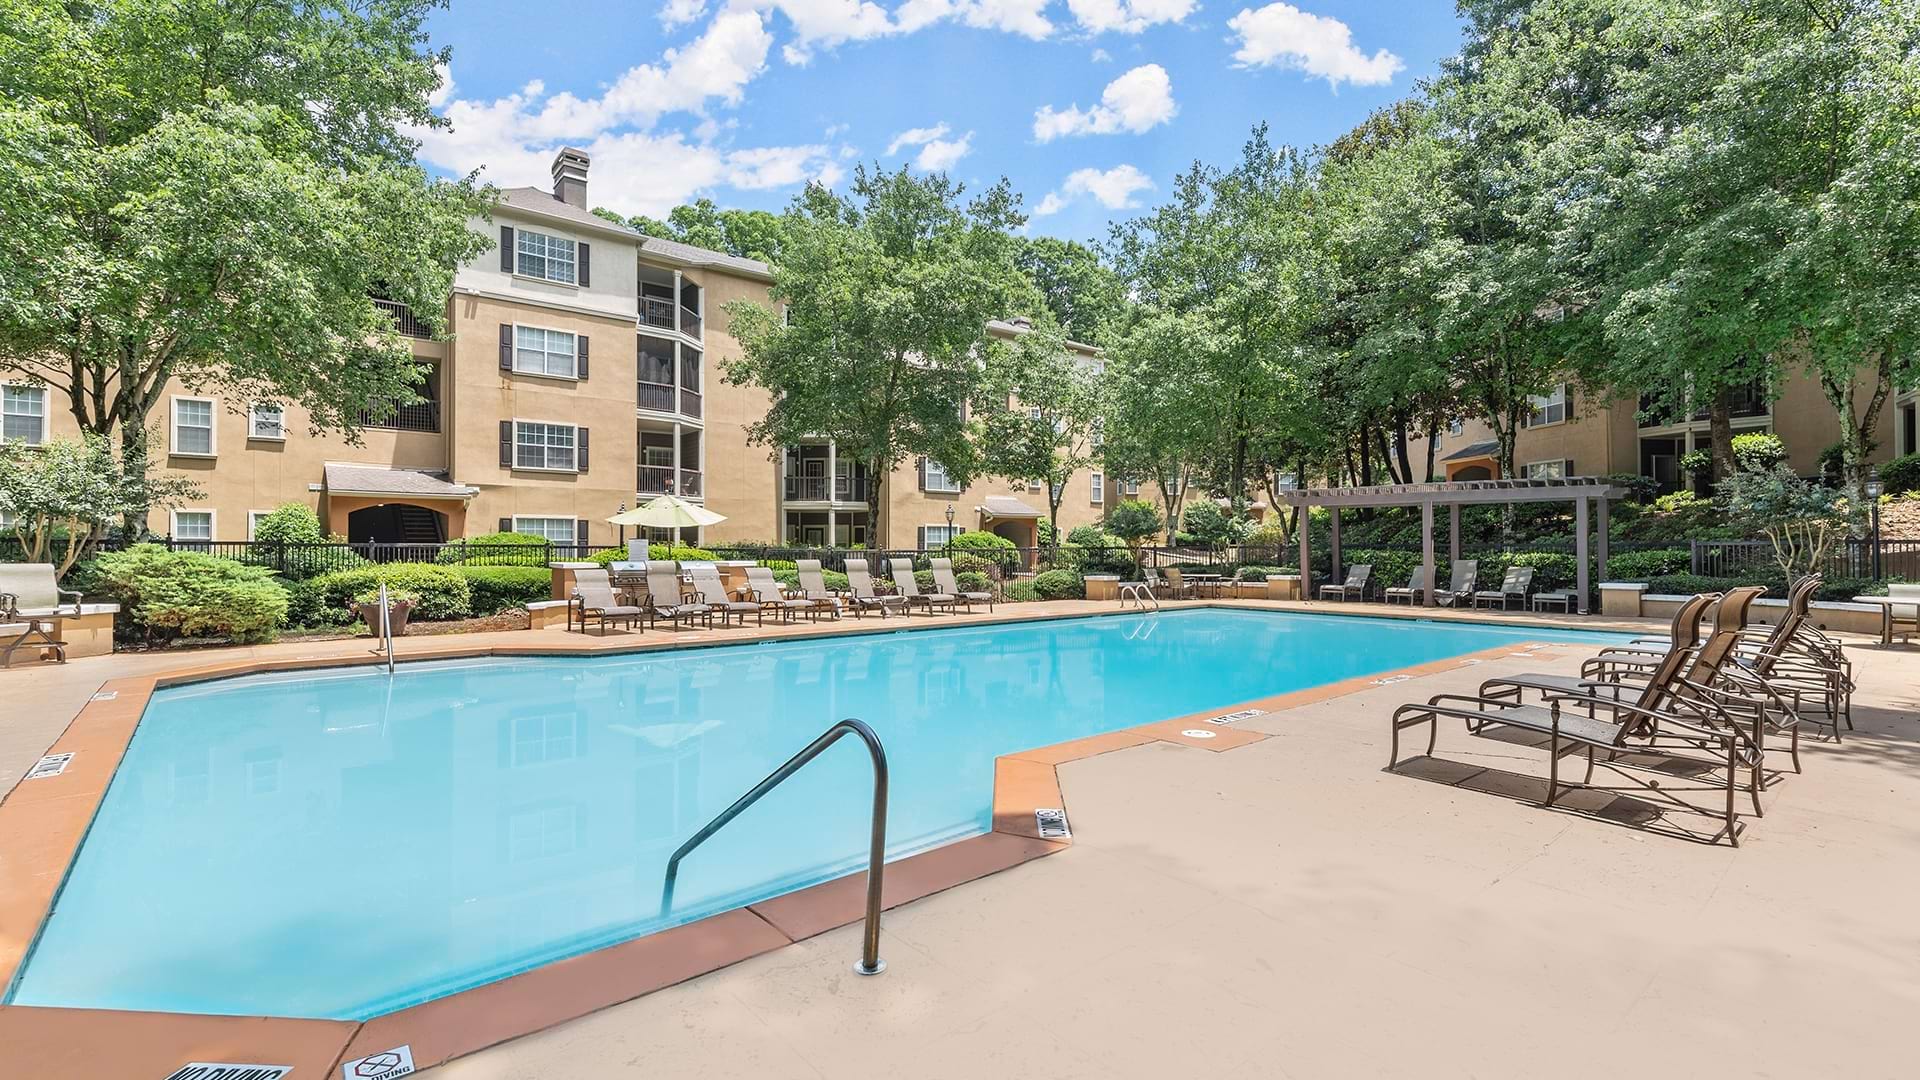 Saltwater Pool and Sun Deck at Our Sandy Springs, Georgia Apartments